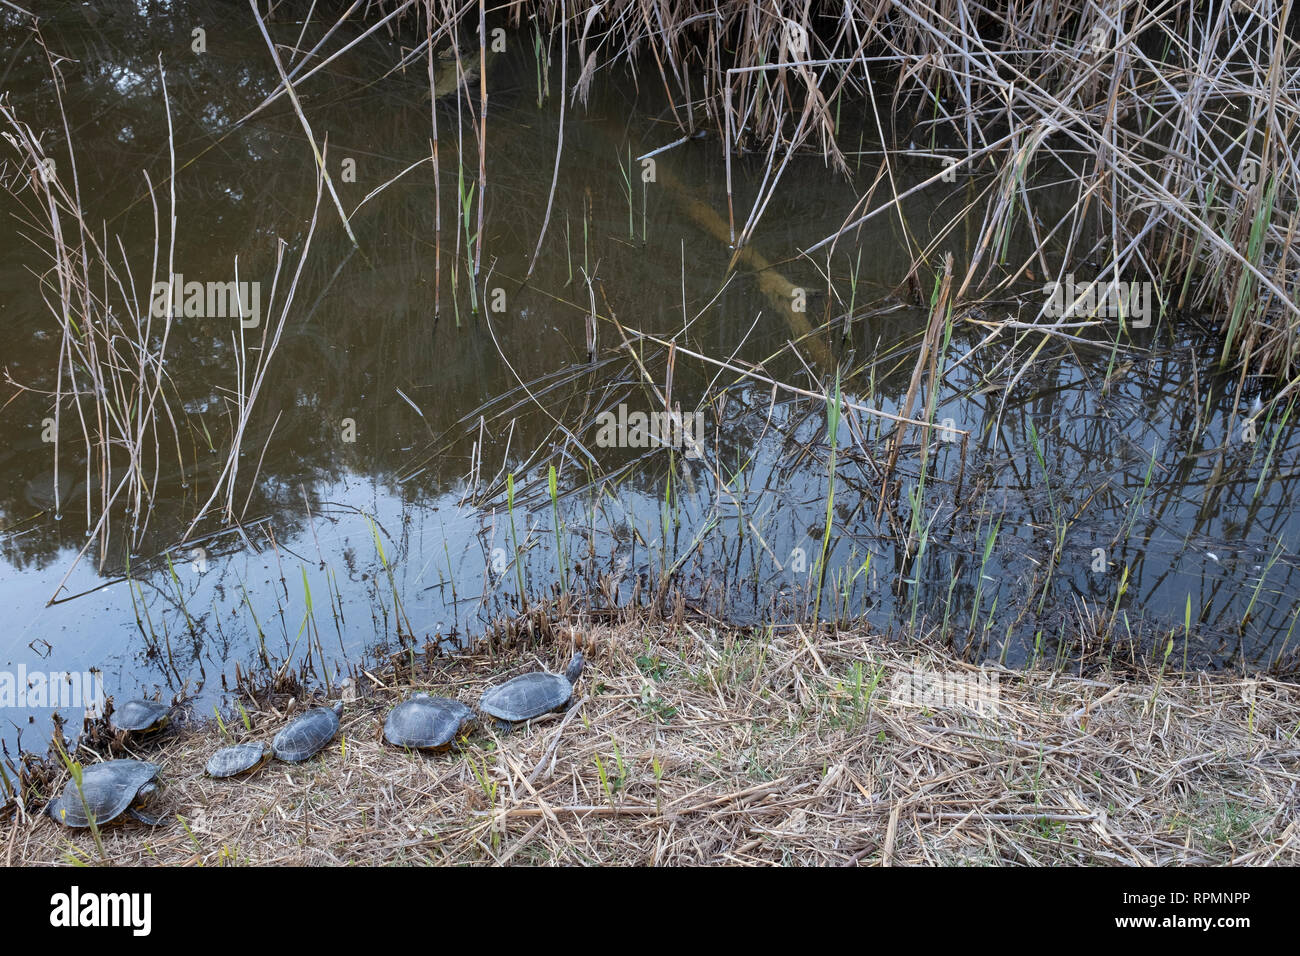 Red-eared slider (Trachemys scripta elegans) group resting on ground. Natural Areas of the Llobregat Delta. Barcelona province. Catalonia. Spain. Stock Photo